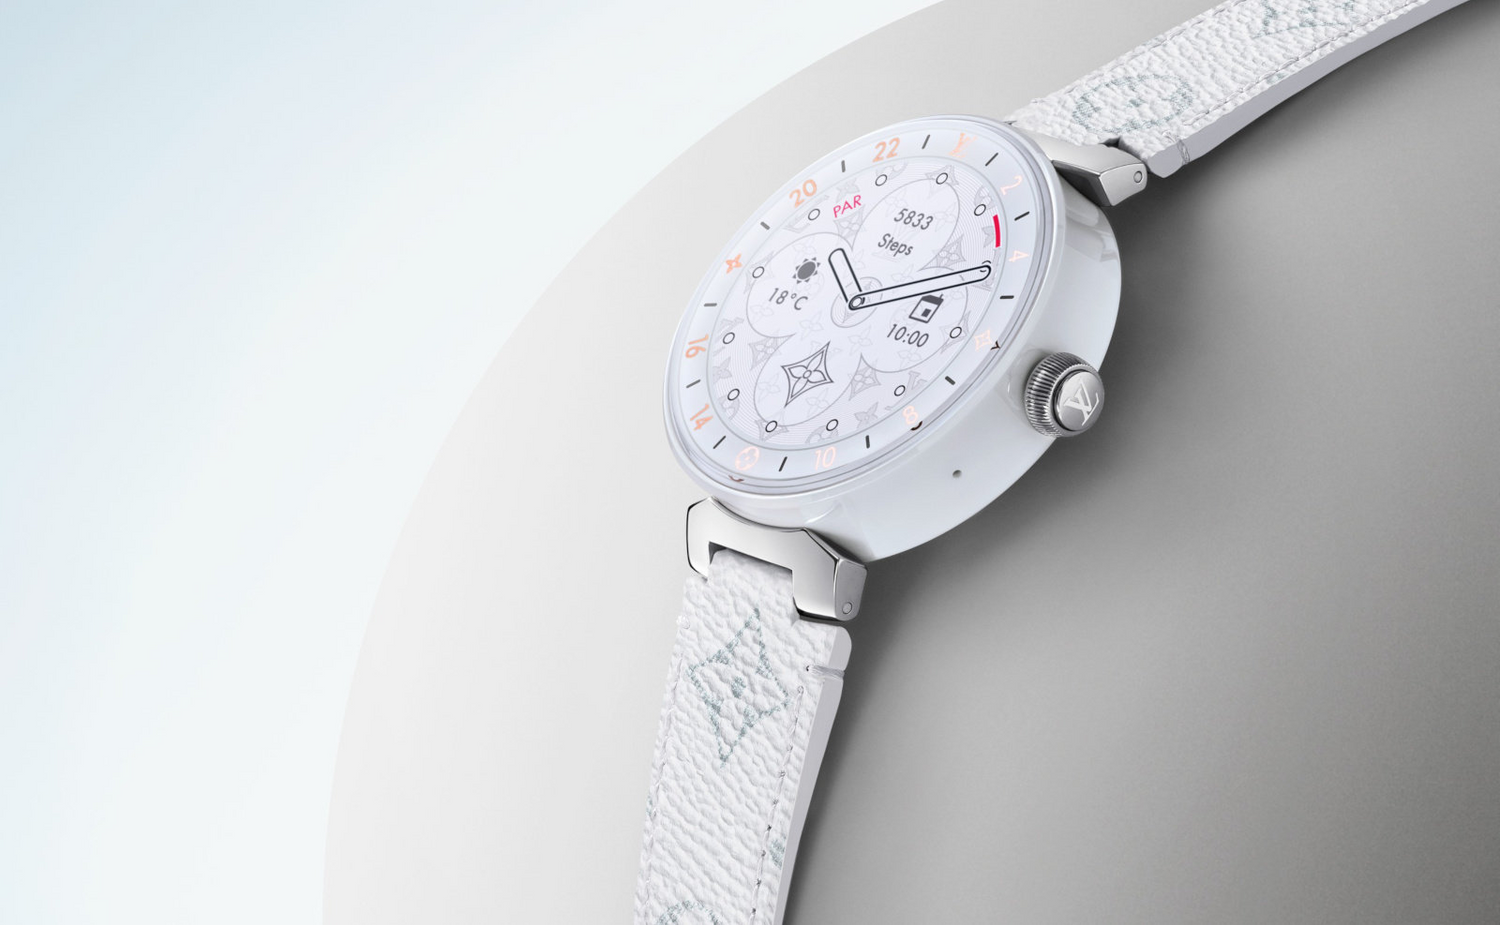 Update: Available starting $2550] Louis Tambour Horizon watch receives a Snapdragon Wear and an screen